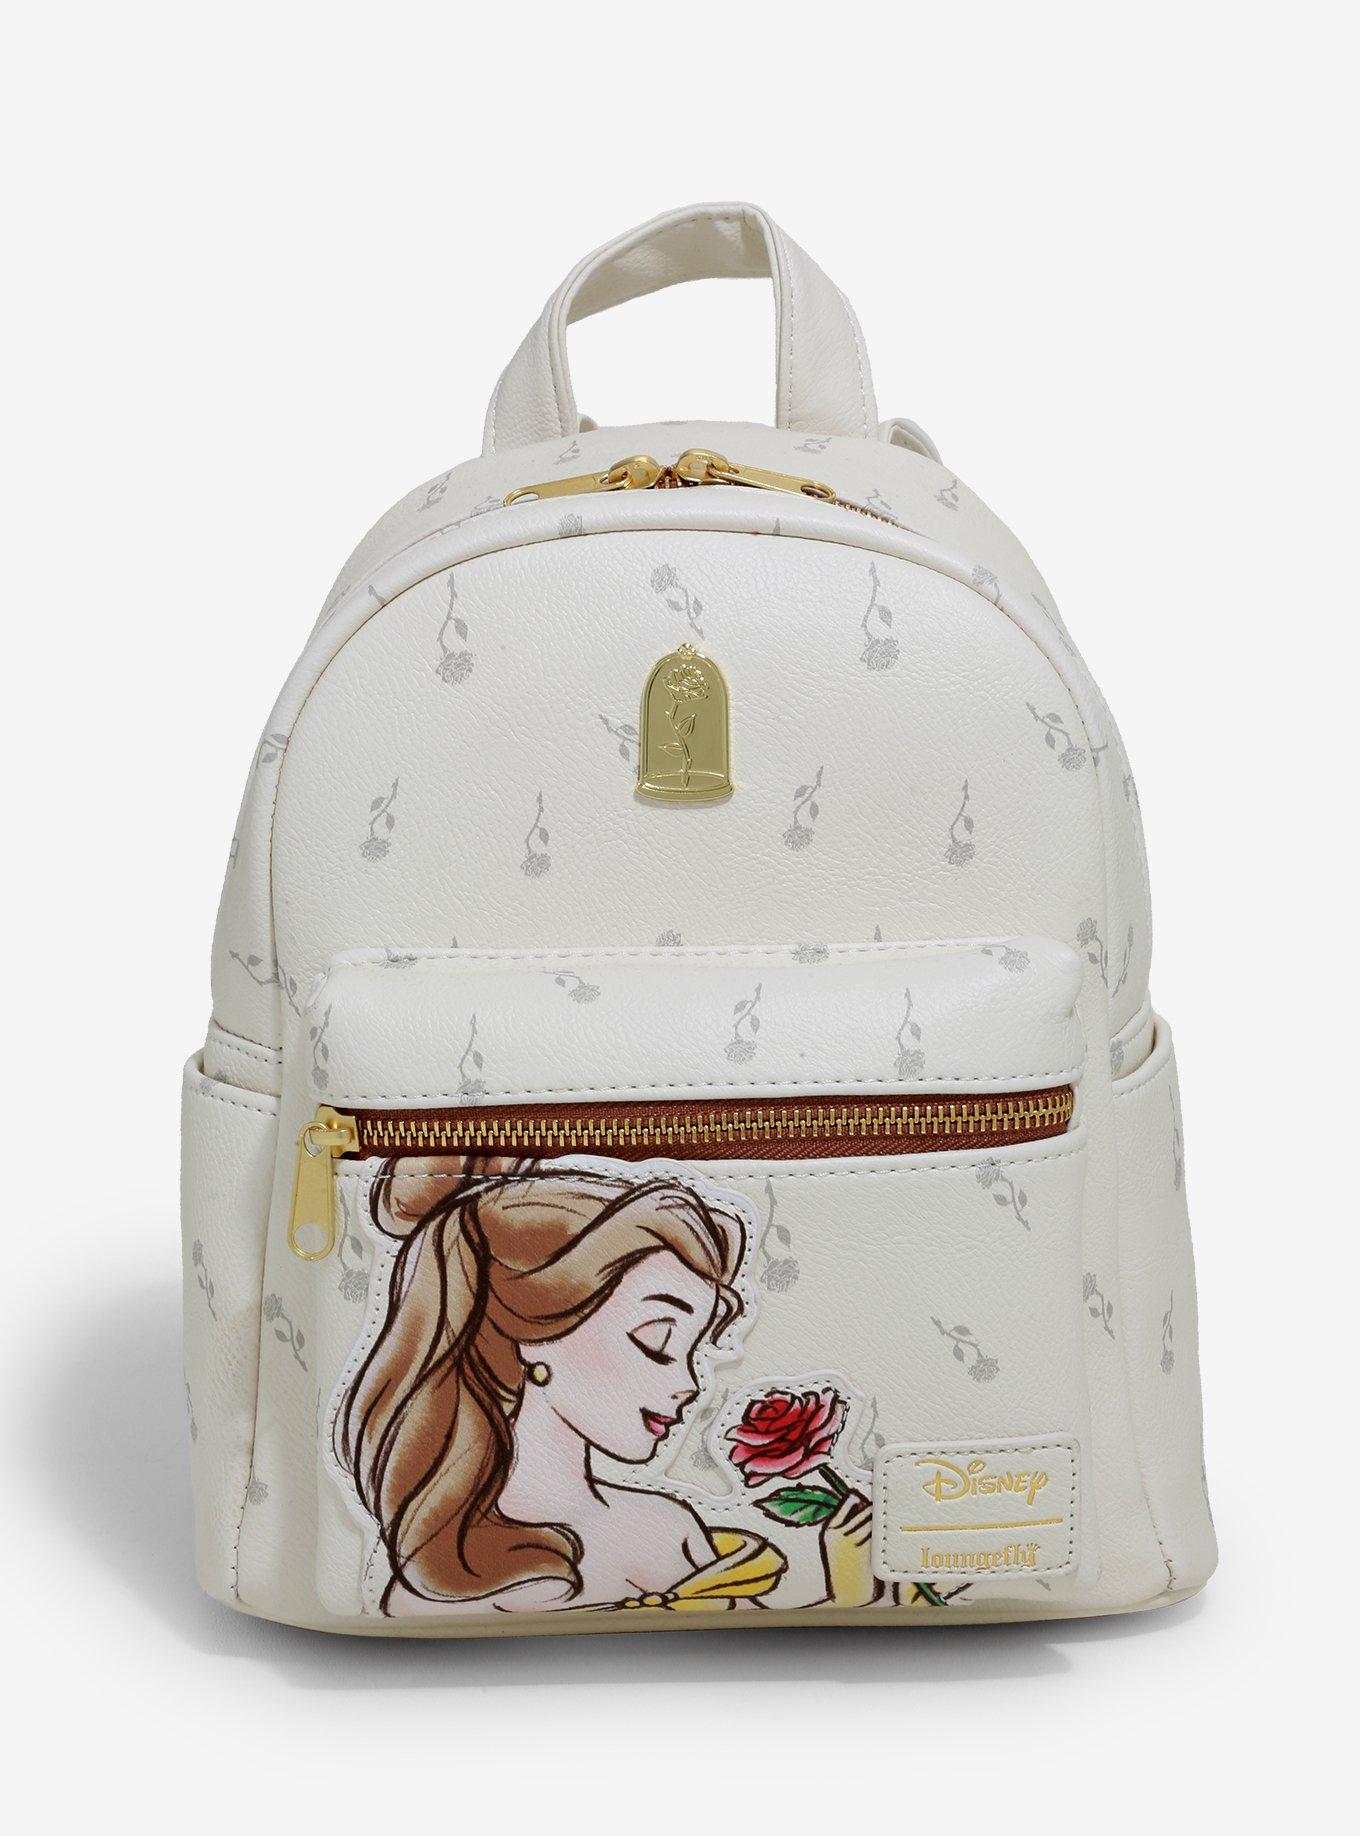 Belle Backpack Loungefly | museosdelima.com